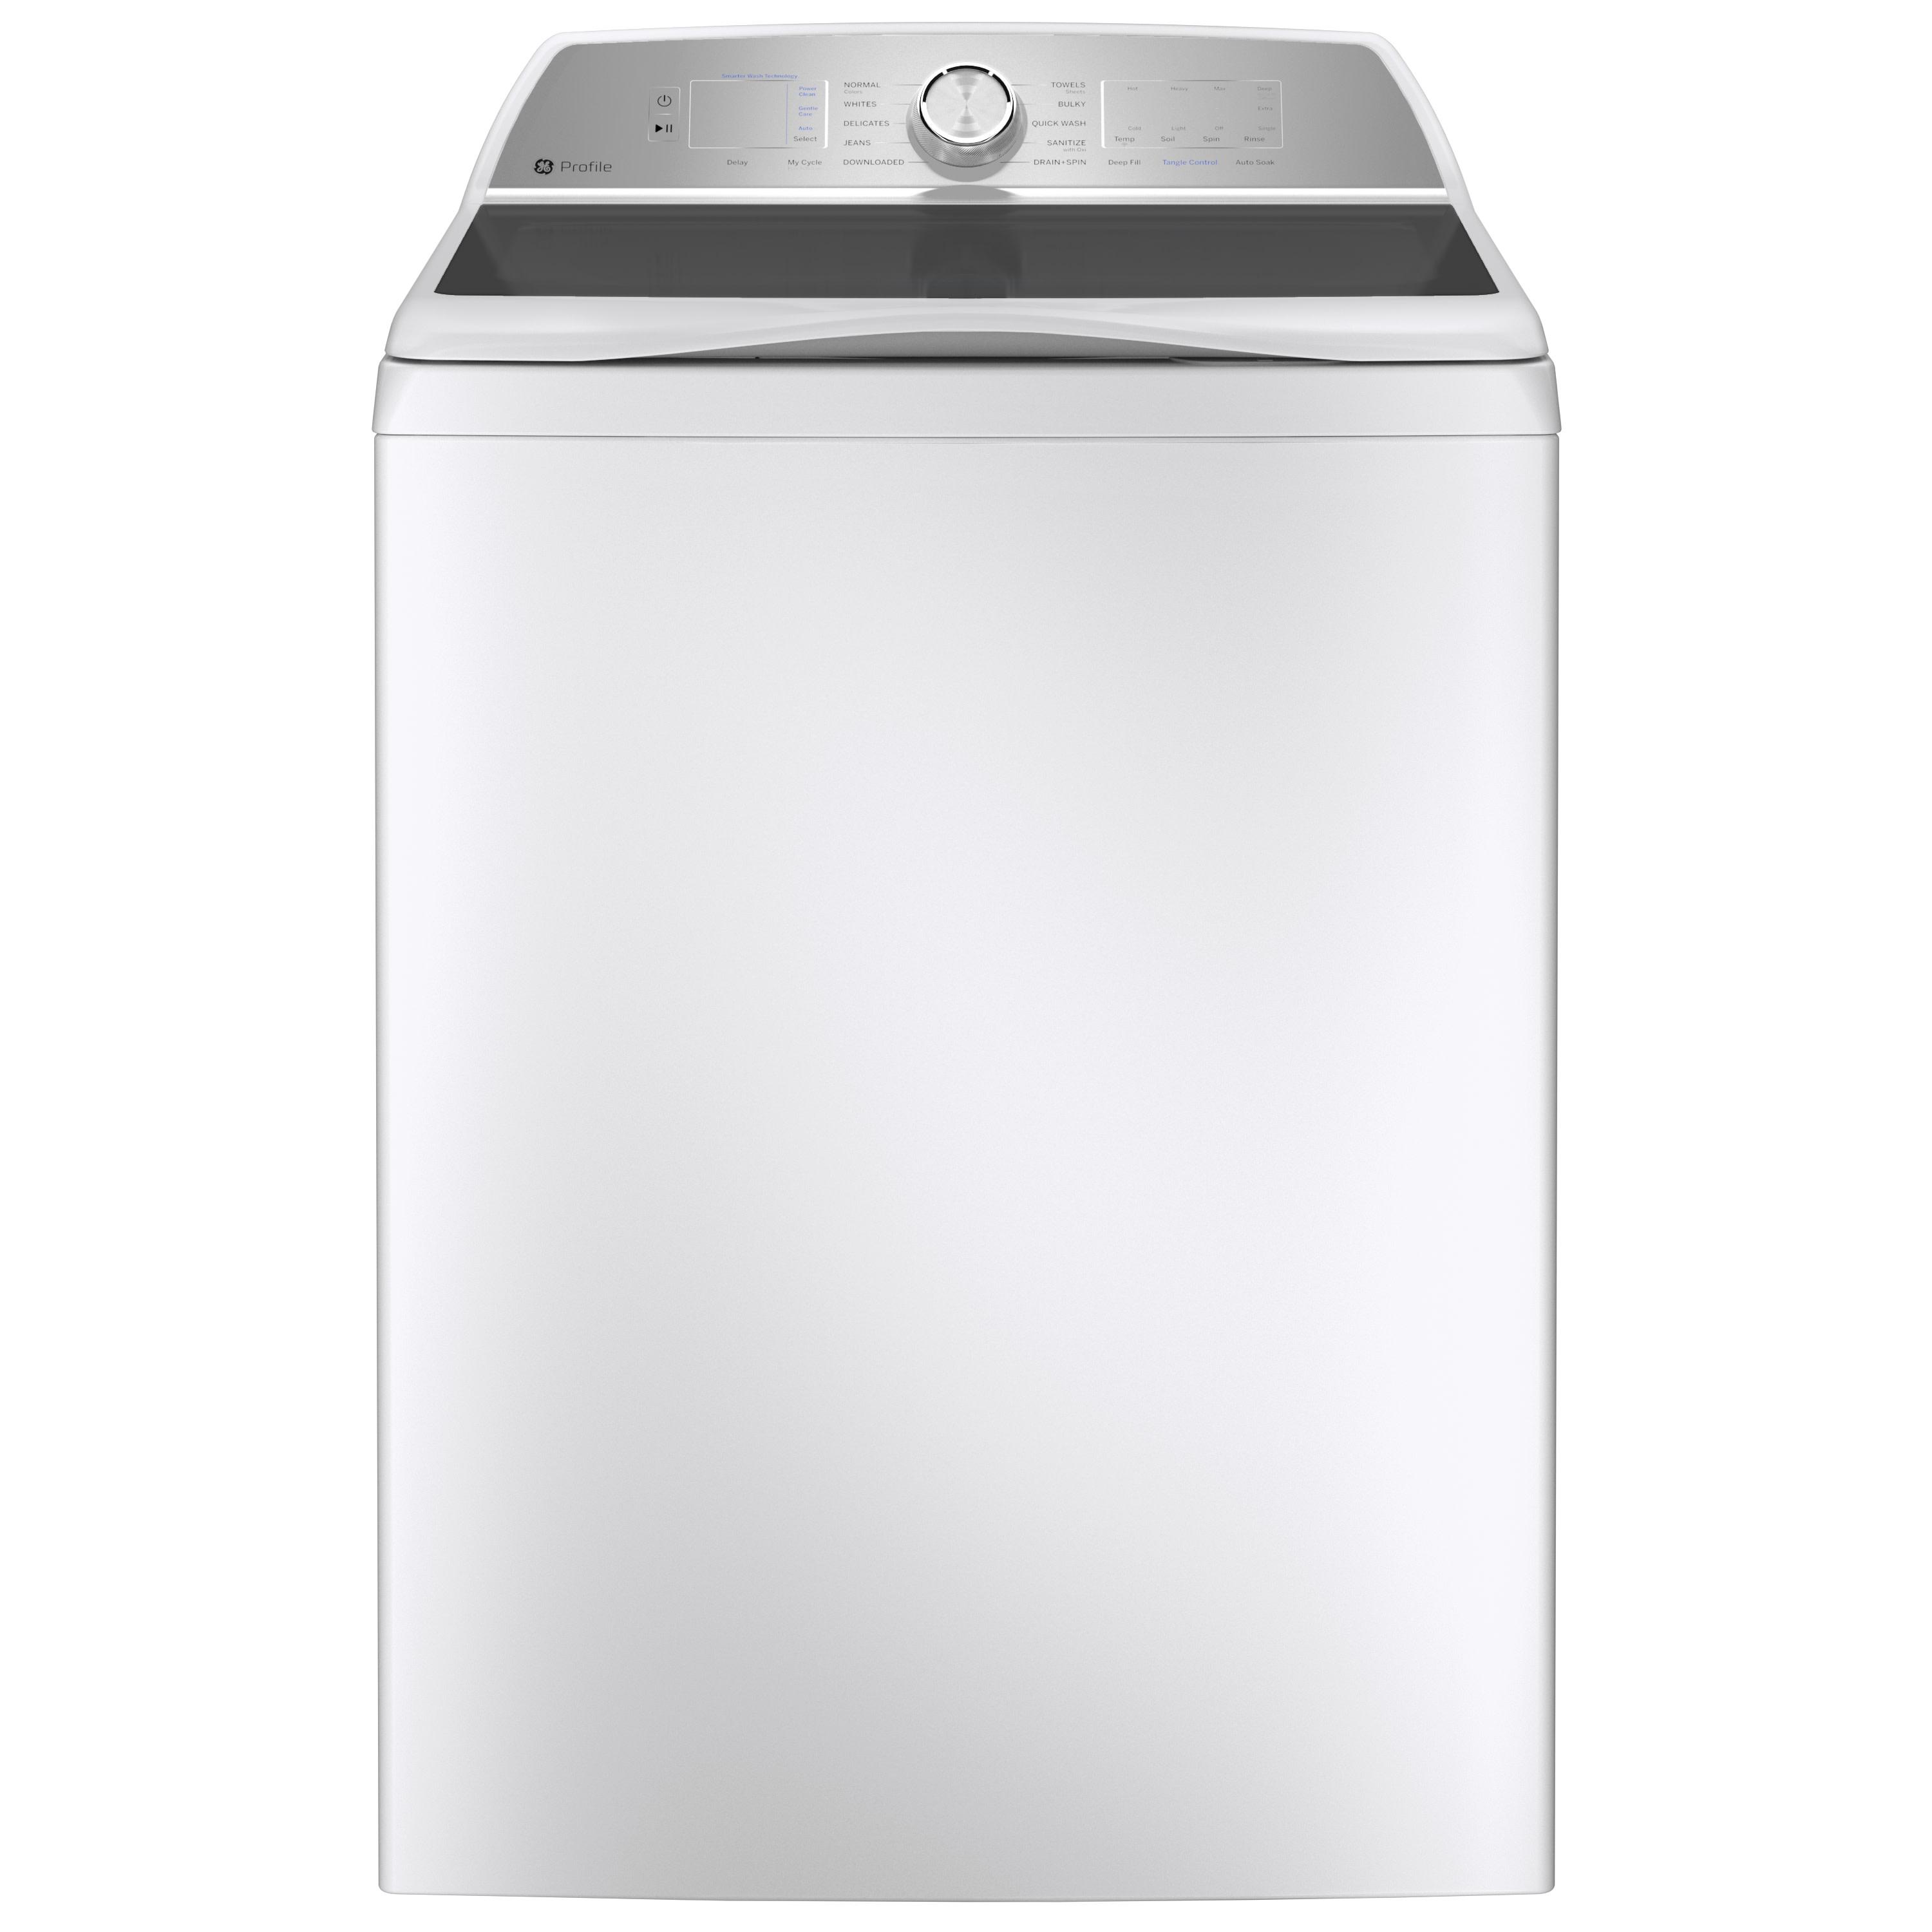 GE Profile PTW605BSRWS 4.9 Cu. Ft. Top Load Washer in White